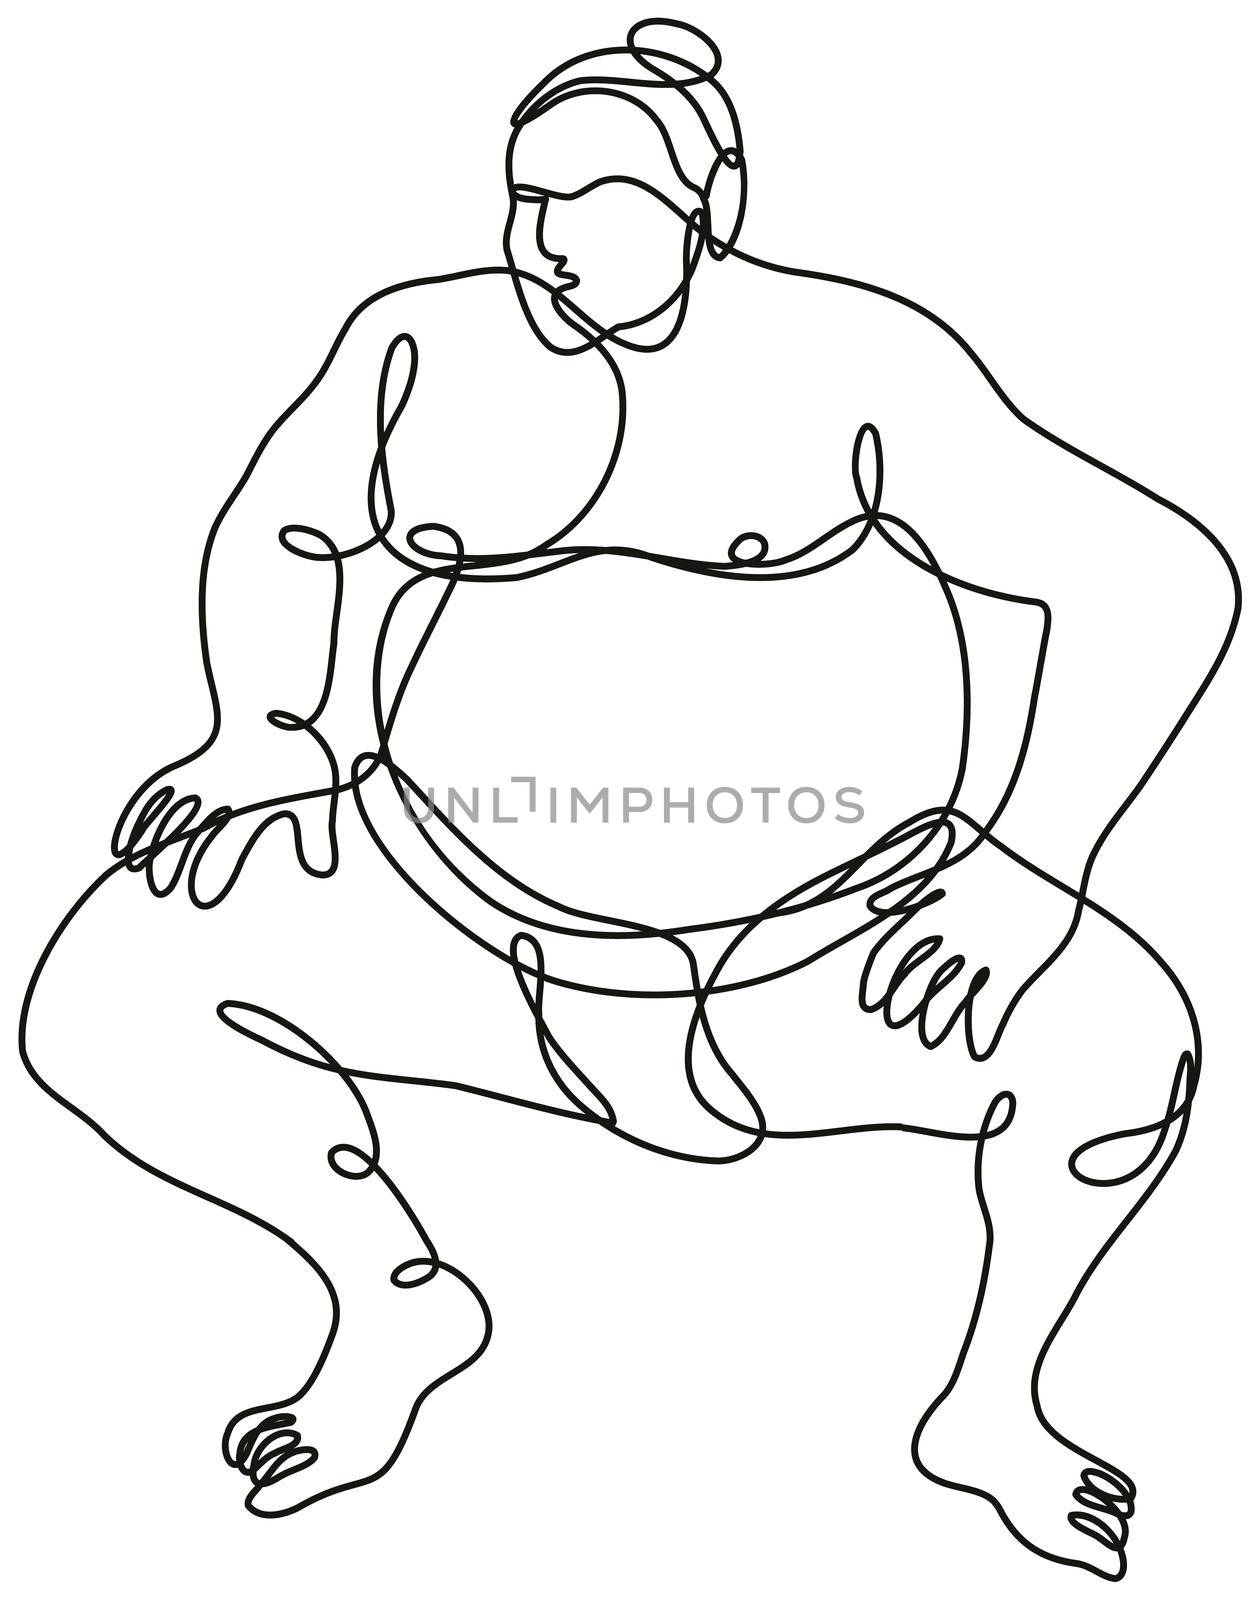 Sumo Wrestler or Rikishi Fighting Stance Front View Continuous Line Drawing by patrimonio